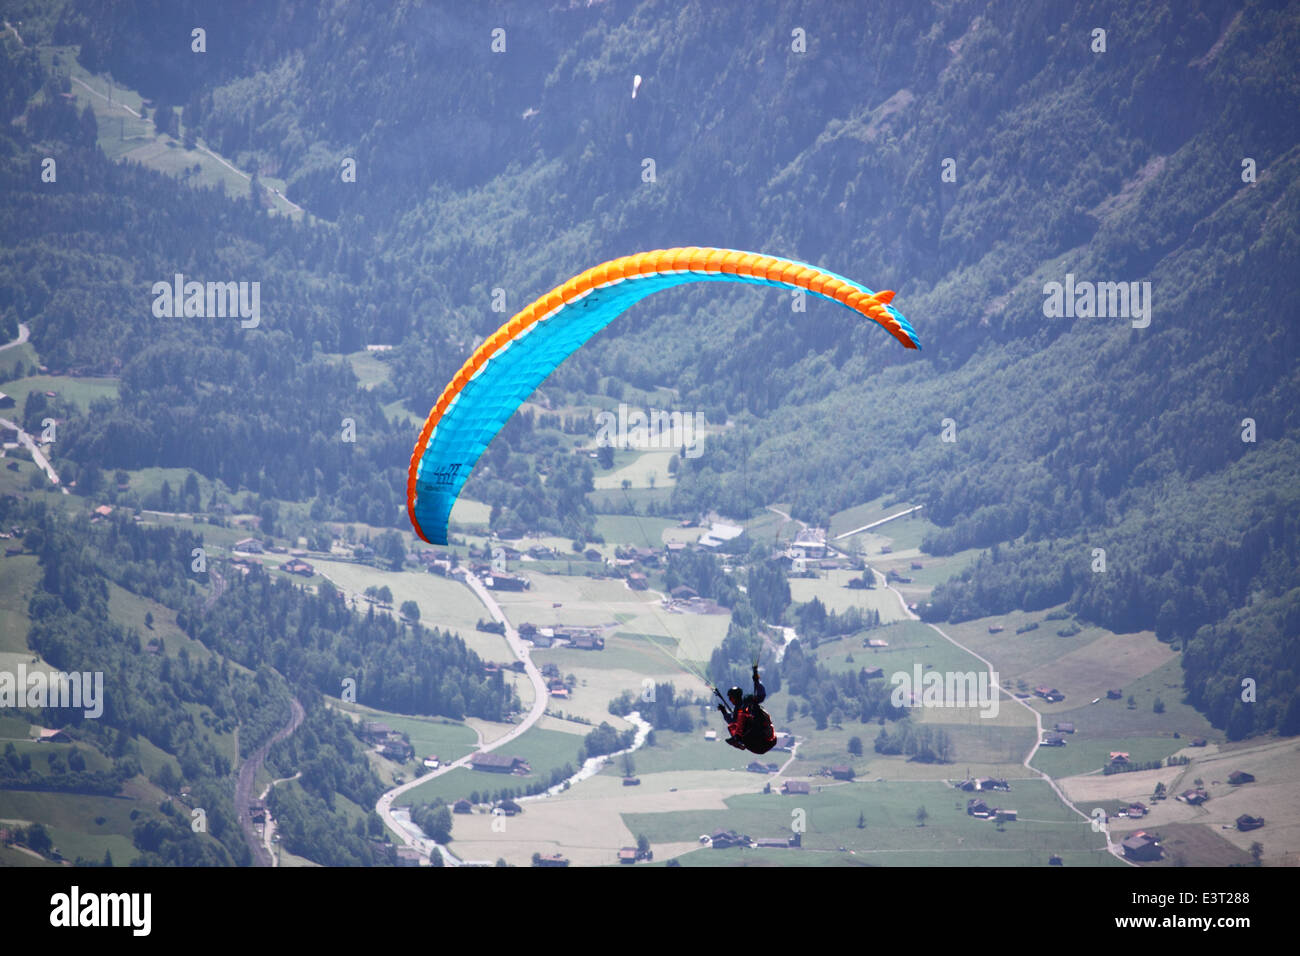 A blue paraglider with forests and fields in the background. Stock Photo